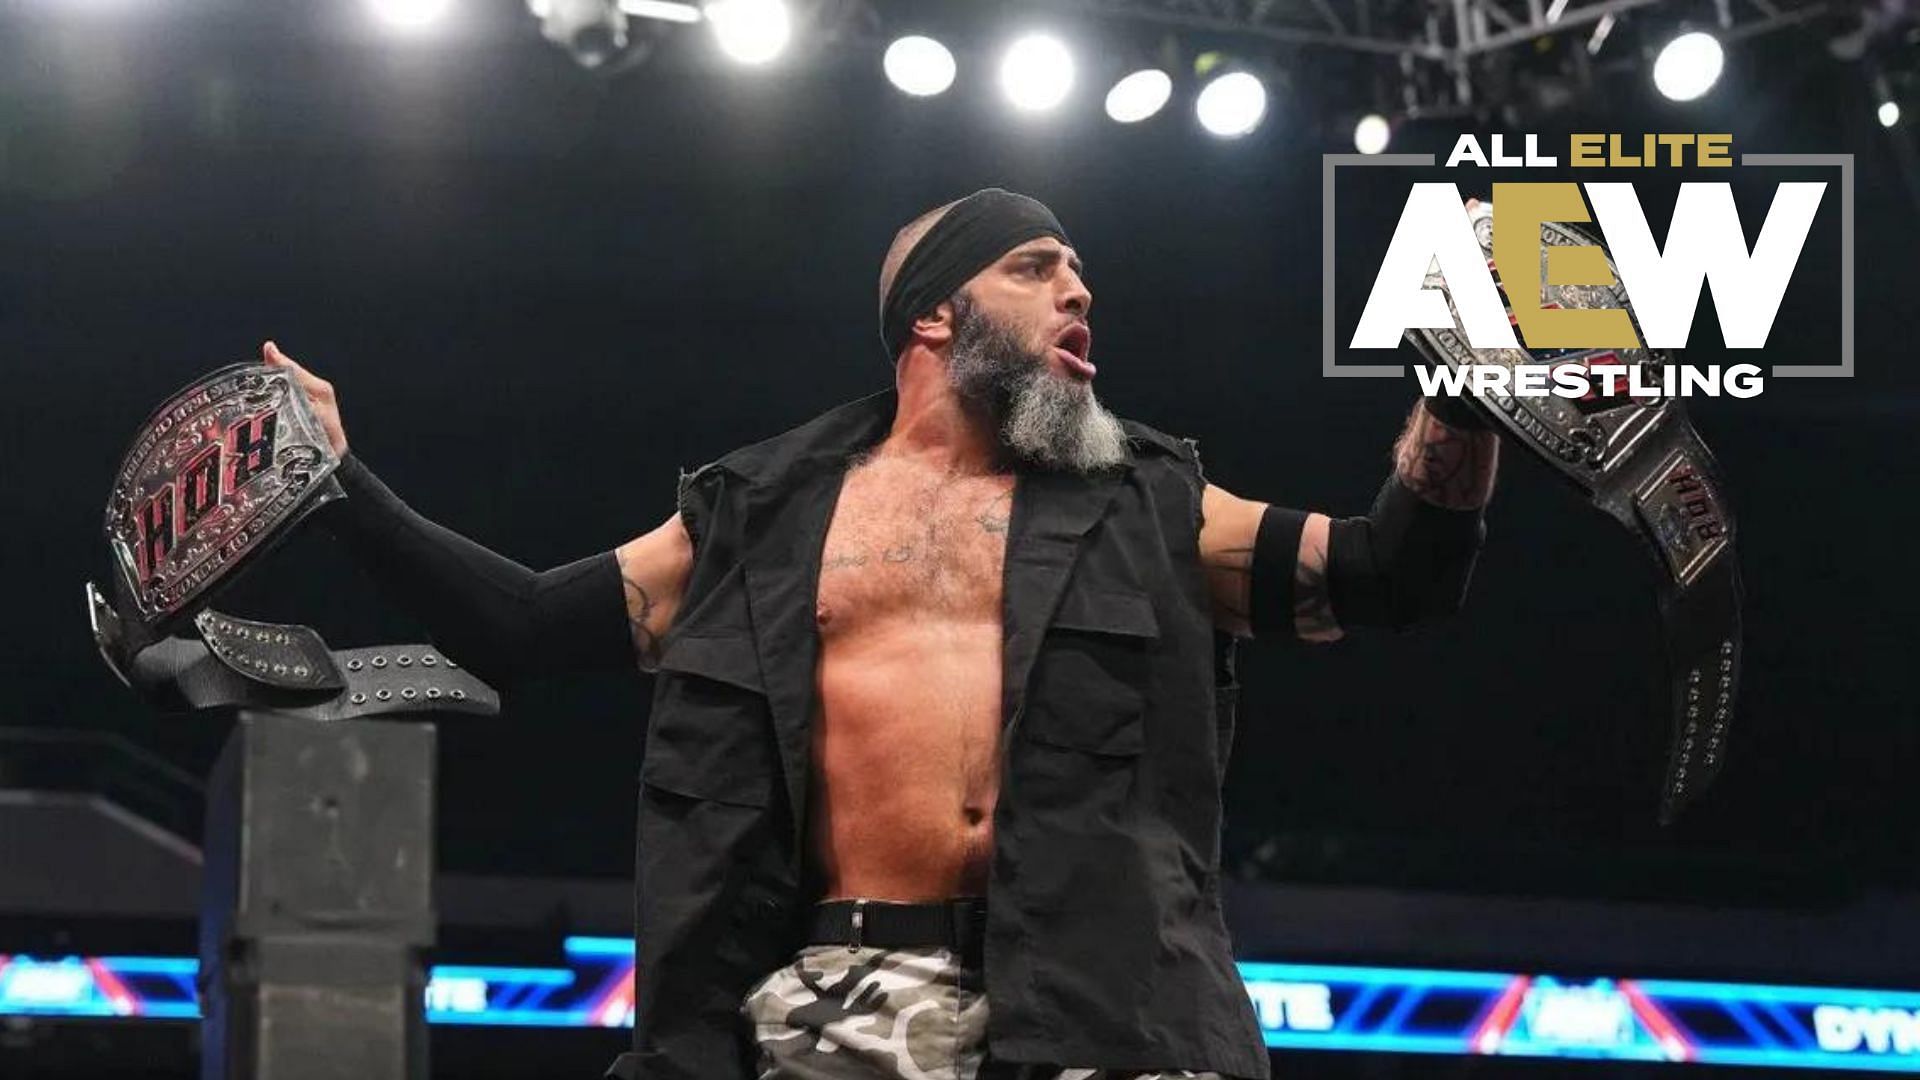 Mark Briscoe is one half of the ROH World Tag Team Champion